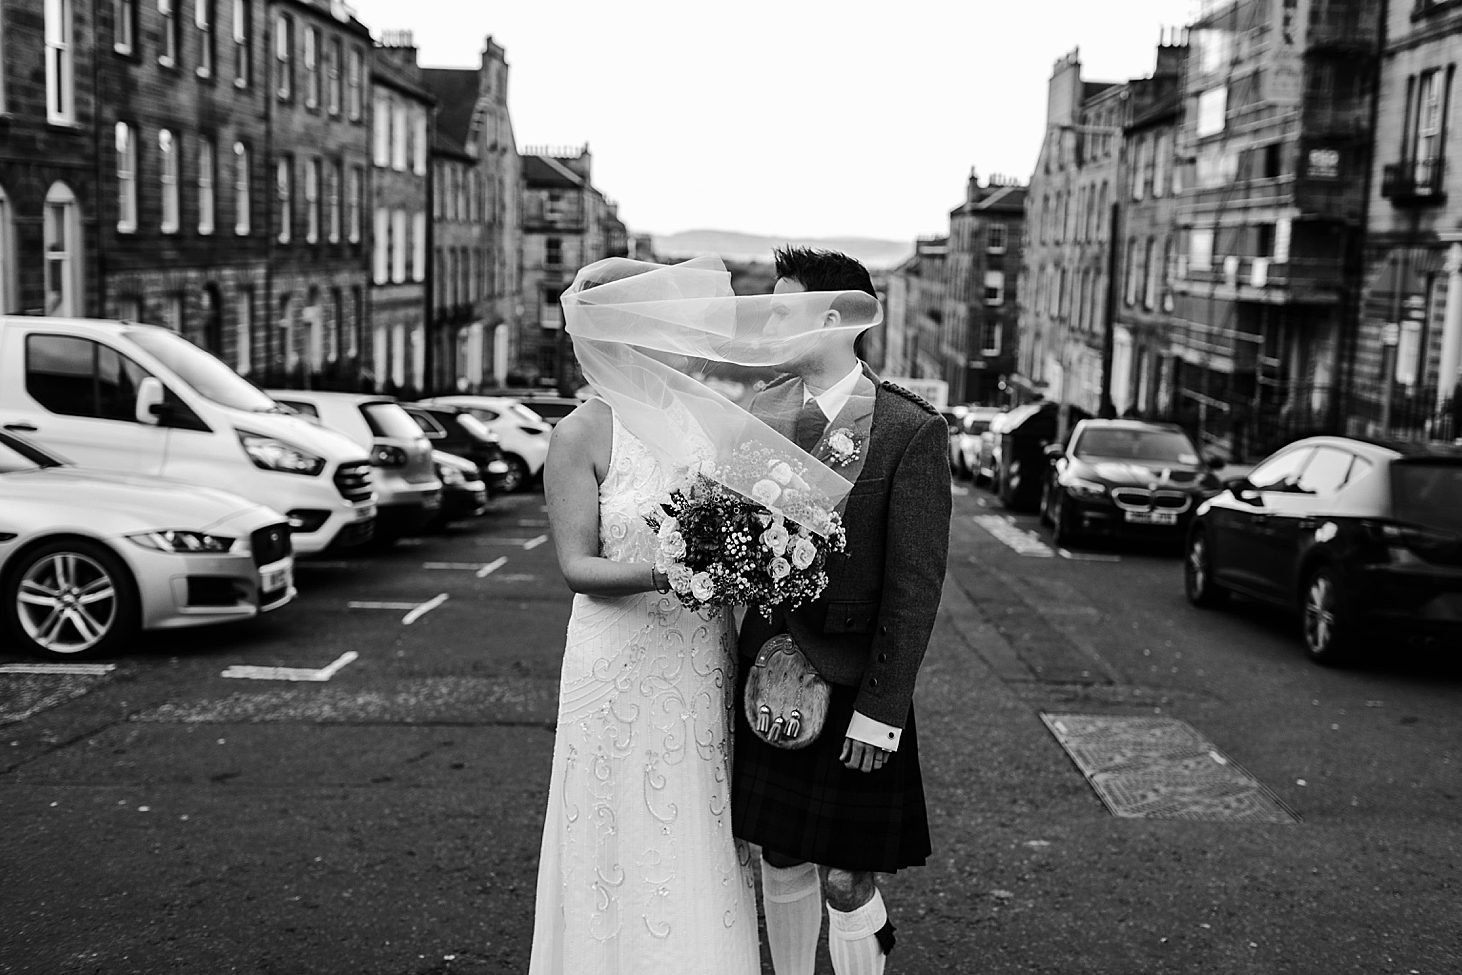 veil blows over bride's face on windy Scottish day